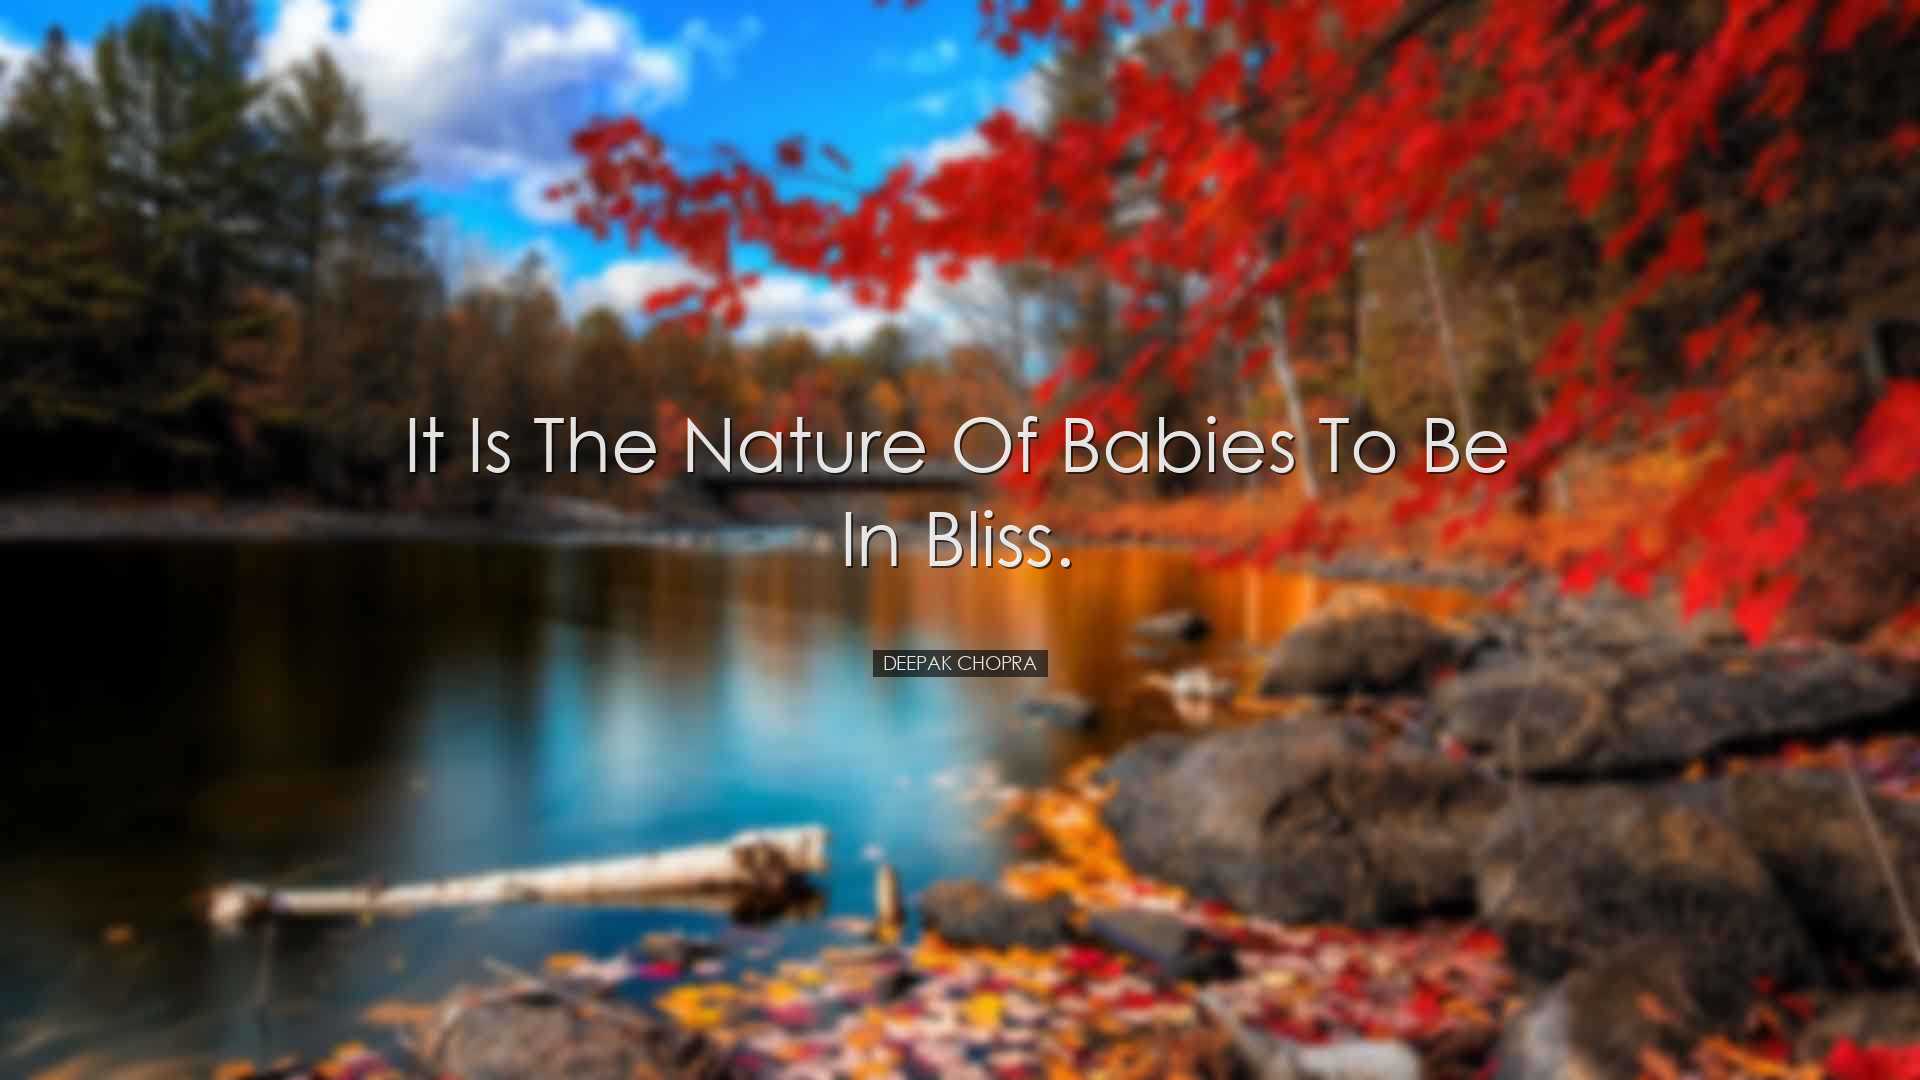 It is the nature of babies to be in bliss. - Deepak Chopra